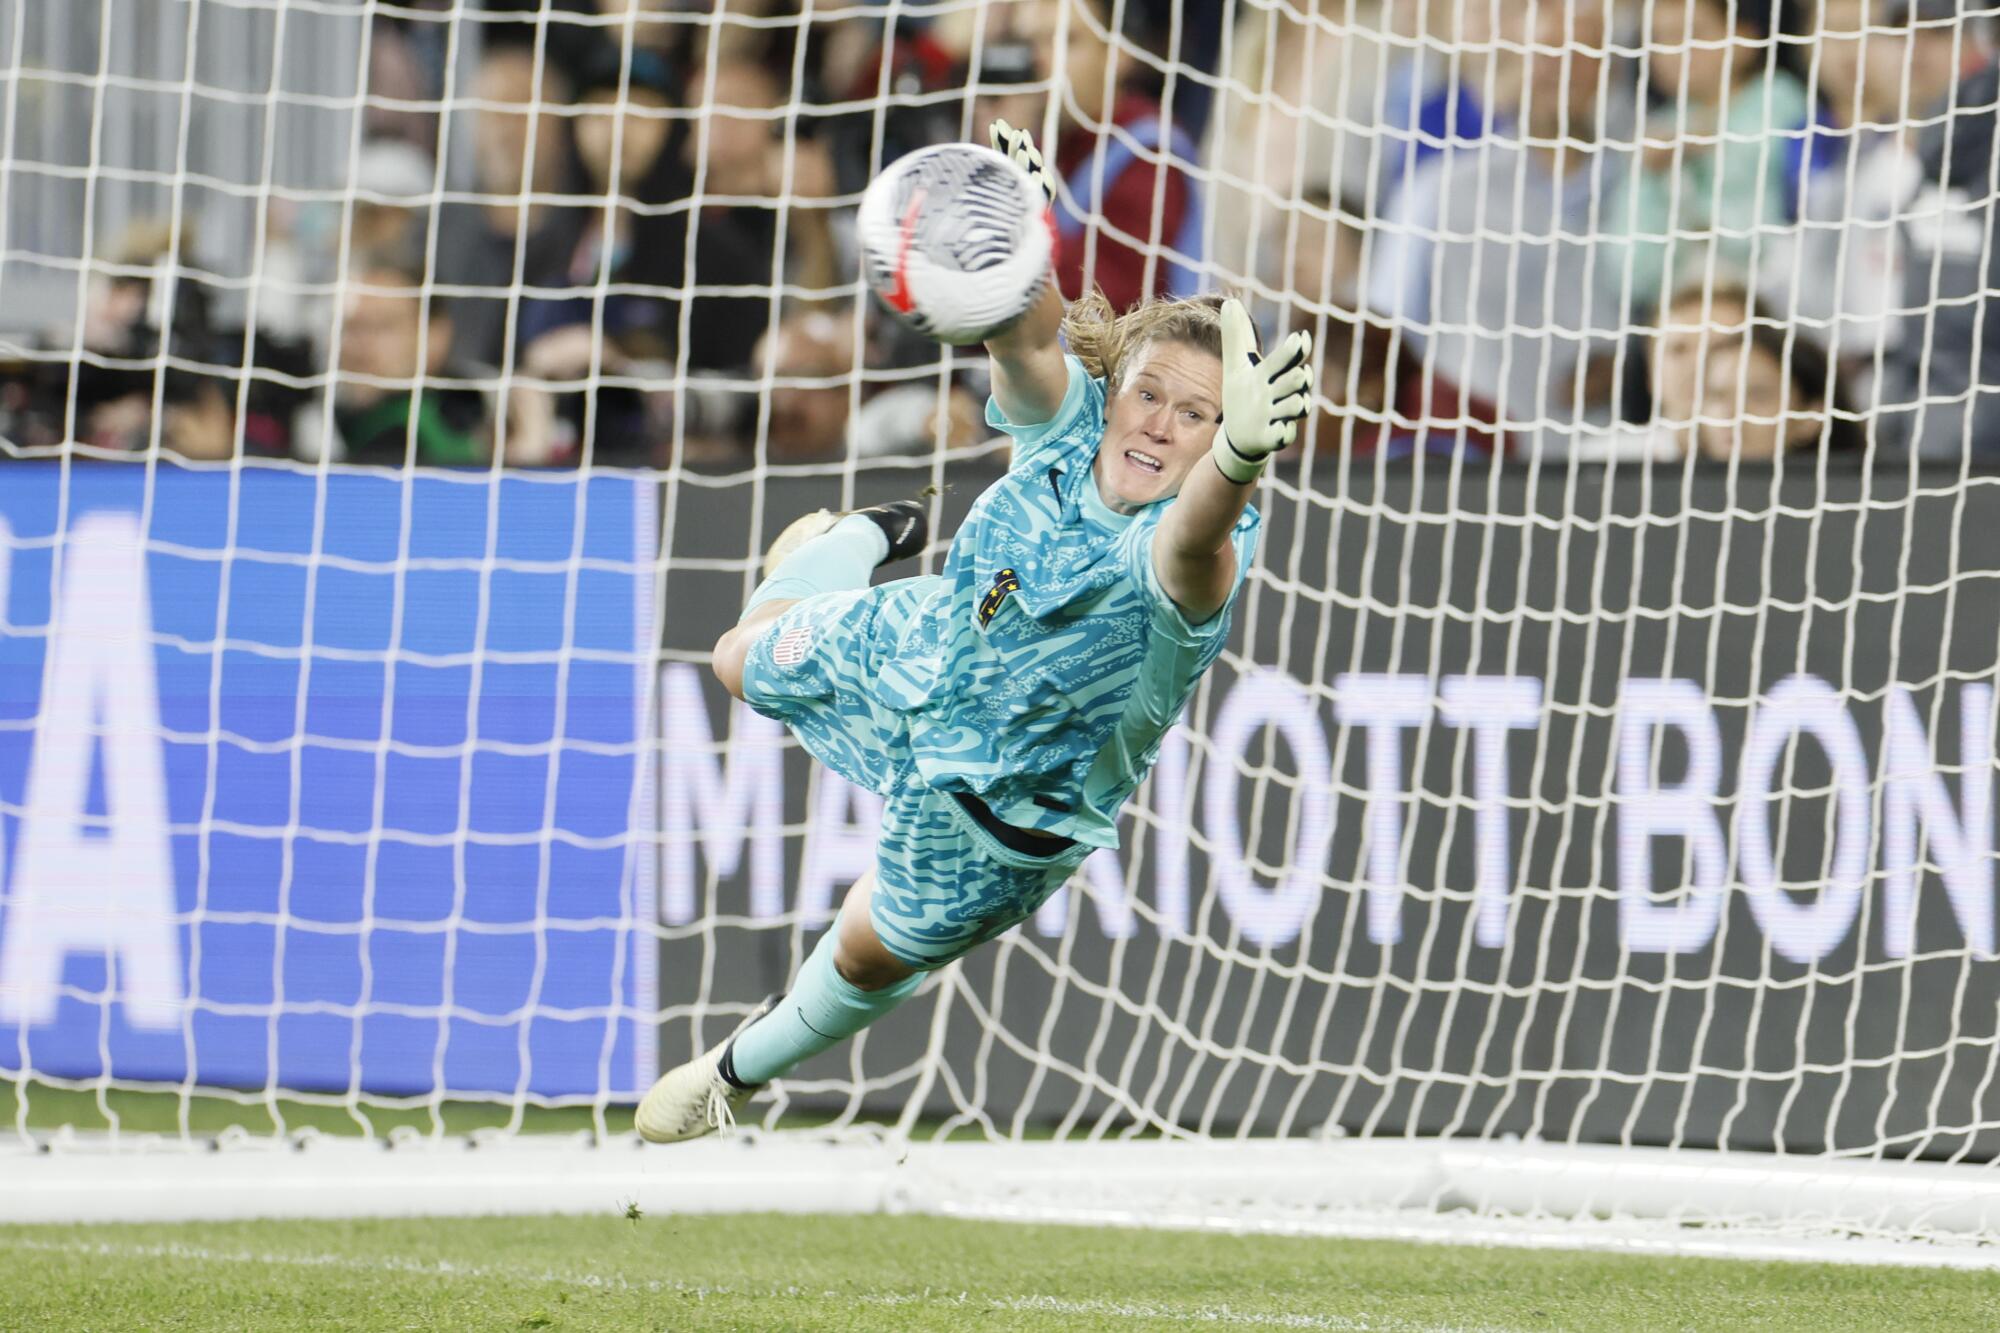 U.S. goalkeeper Alyssa Naeher dives to make a save during a match against Canada in the SheBelieves Cup in April.